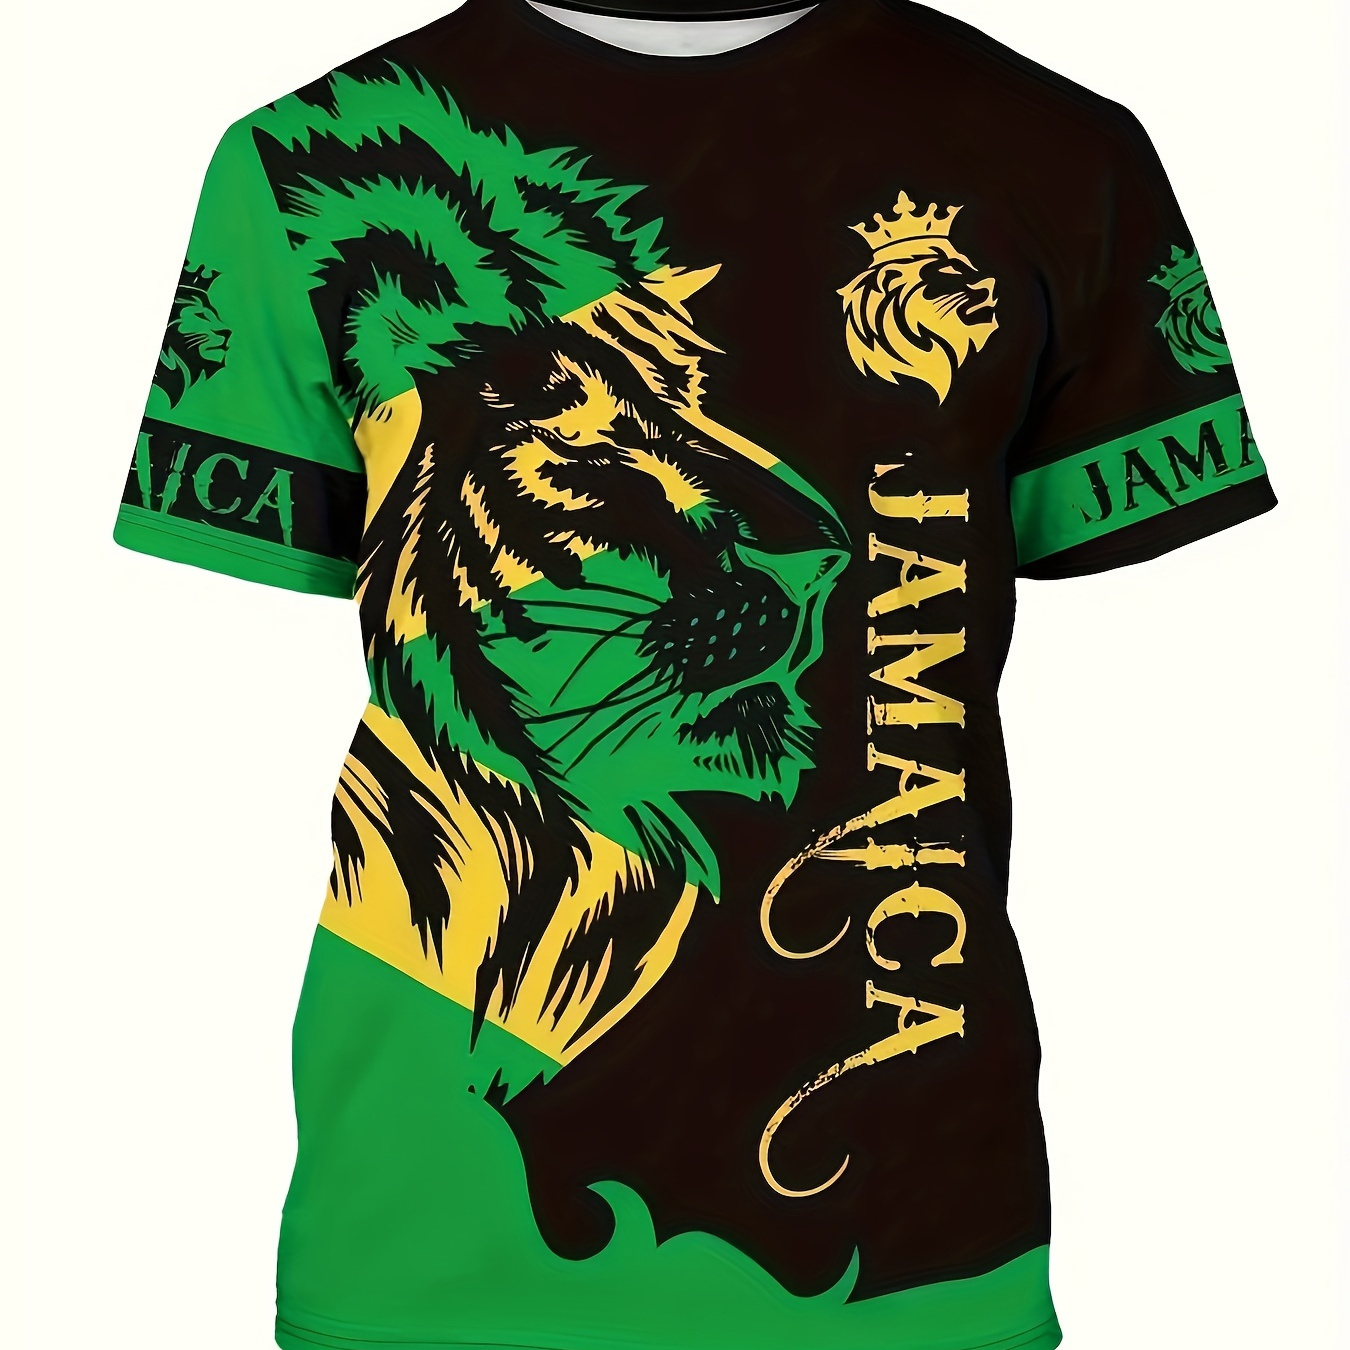 

Jamaica & Lion King 3d Digital Print Crew Neck Short Sleeve T-shirt For Men, Casual Summer T-shirt For Daily Wear And Vacation Resorts